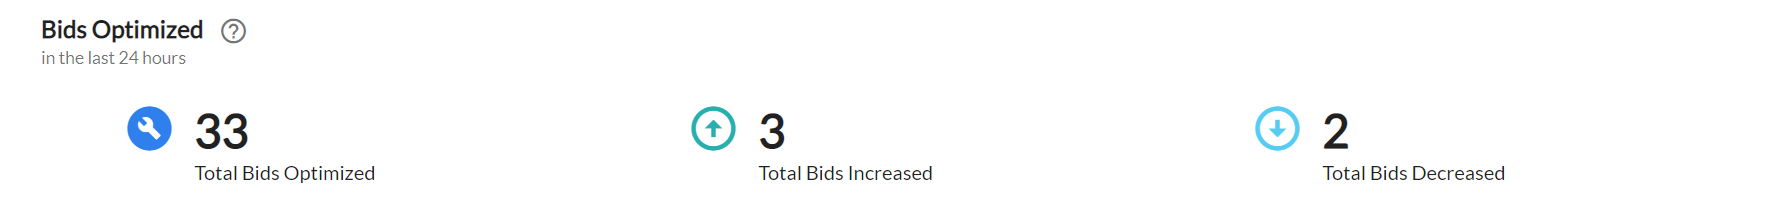 A screenshot of the Bids Optimized section of the Ad Badger Bids by Badger Dashboard.